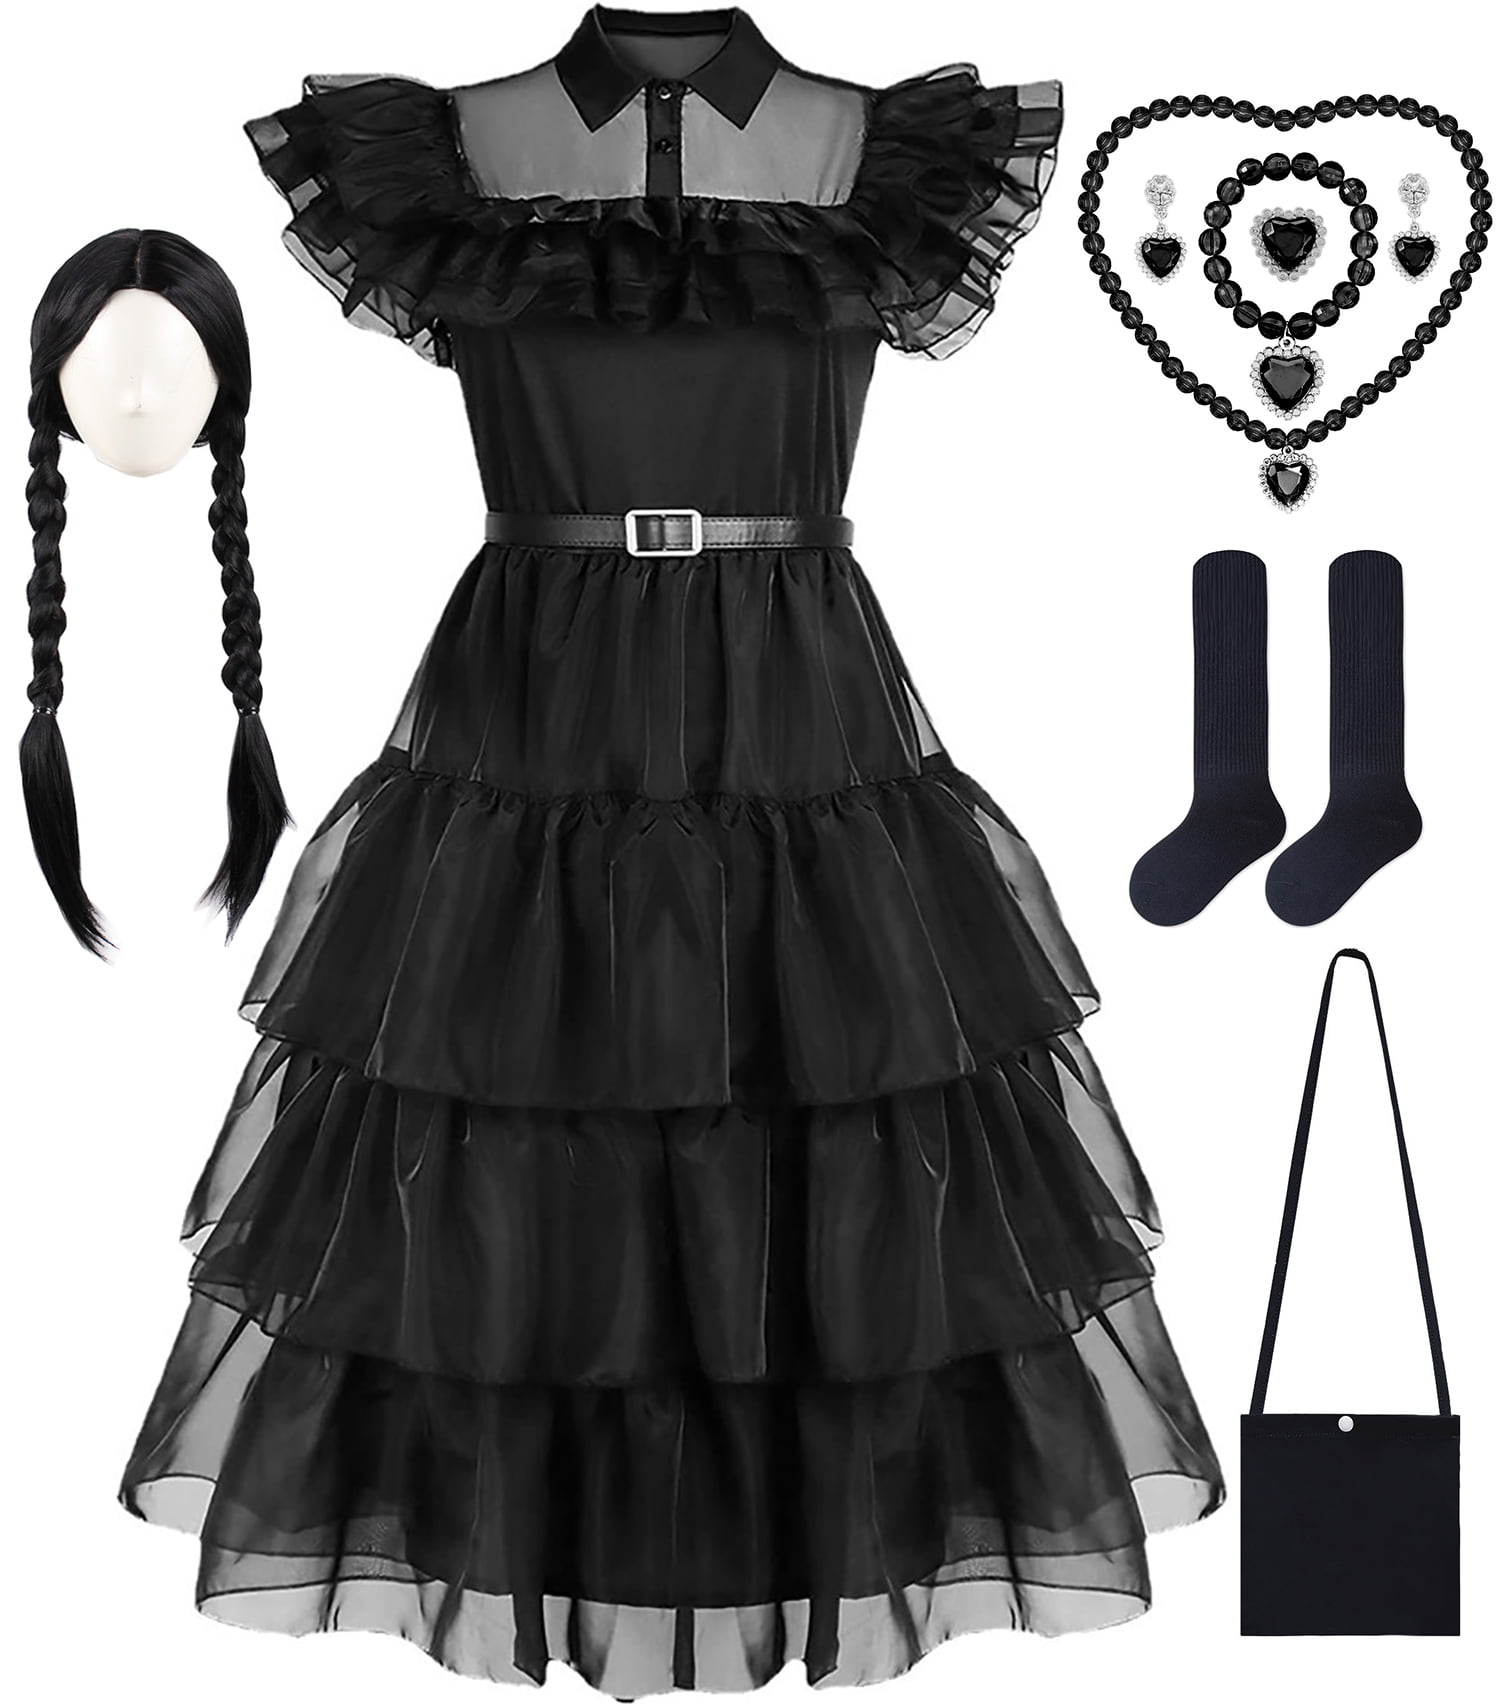 Girls Wednesday Addams Costume Halloween Fancy Dress with Wig Black for ...